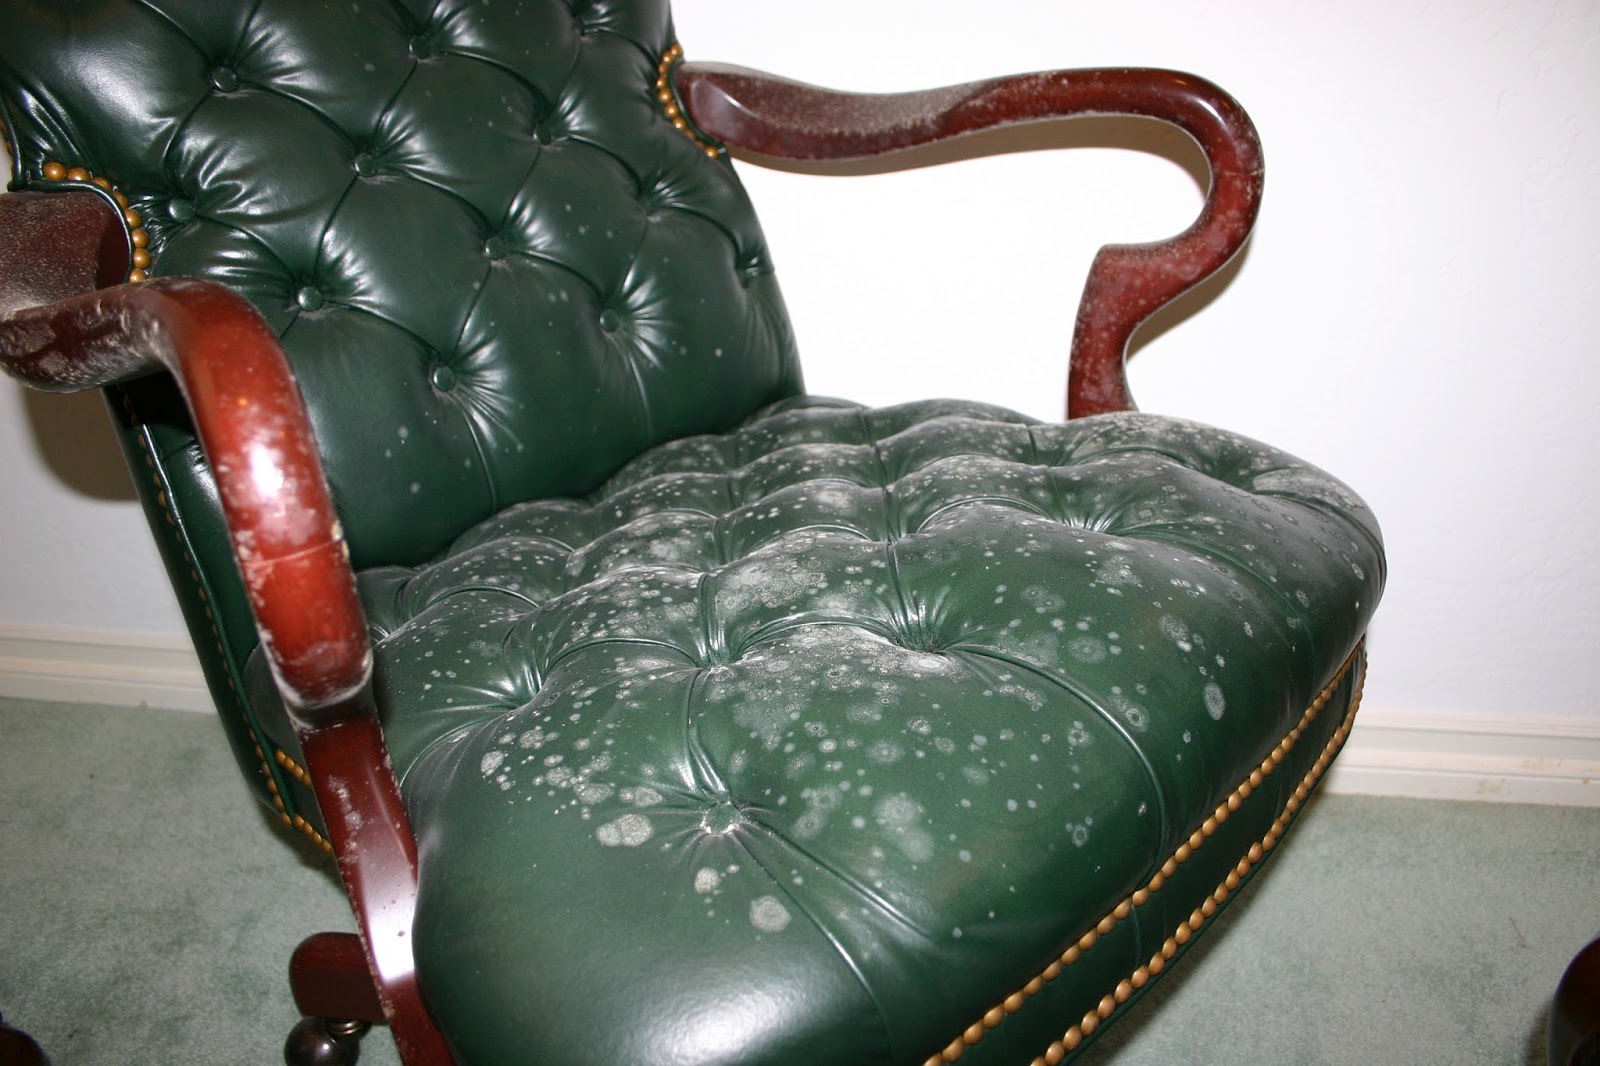 mold growing on a green leather chair.